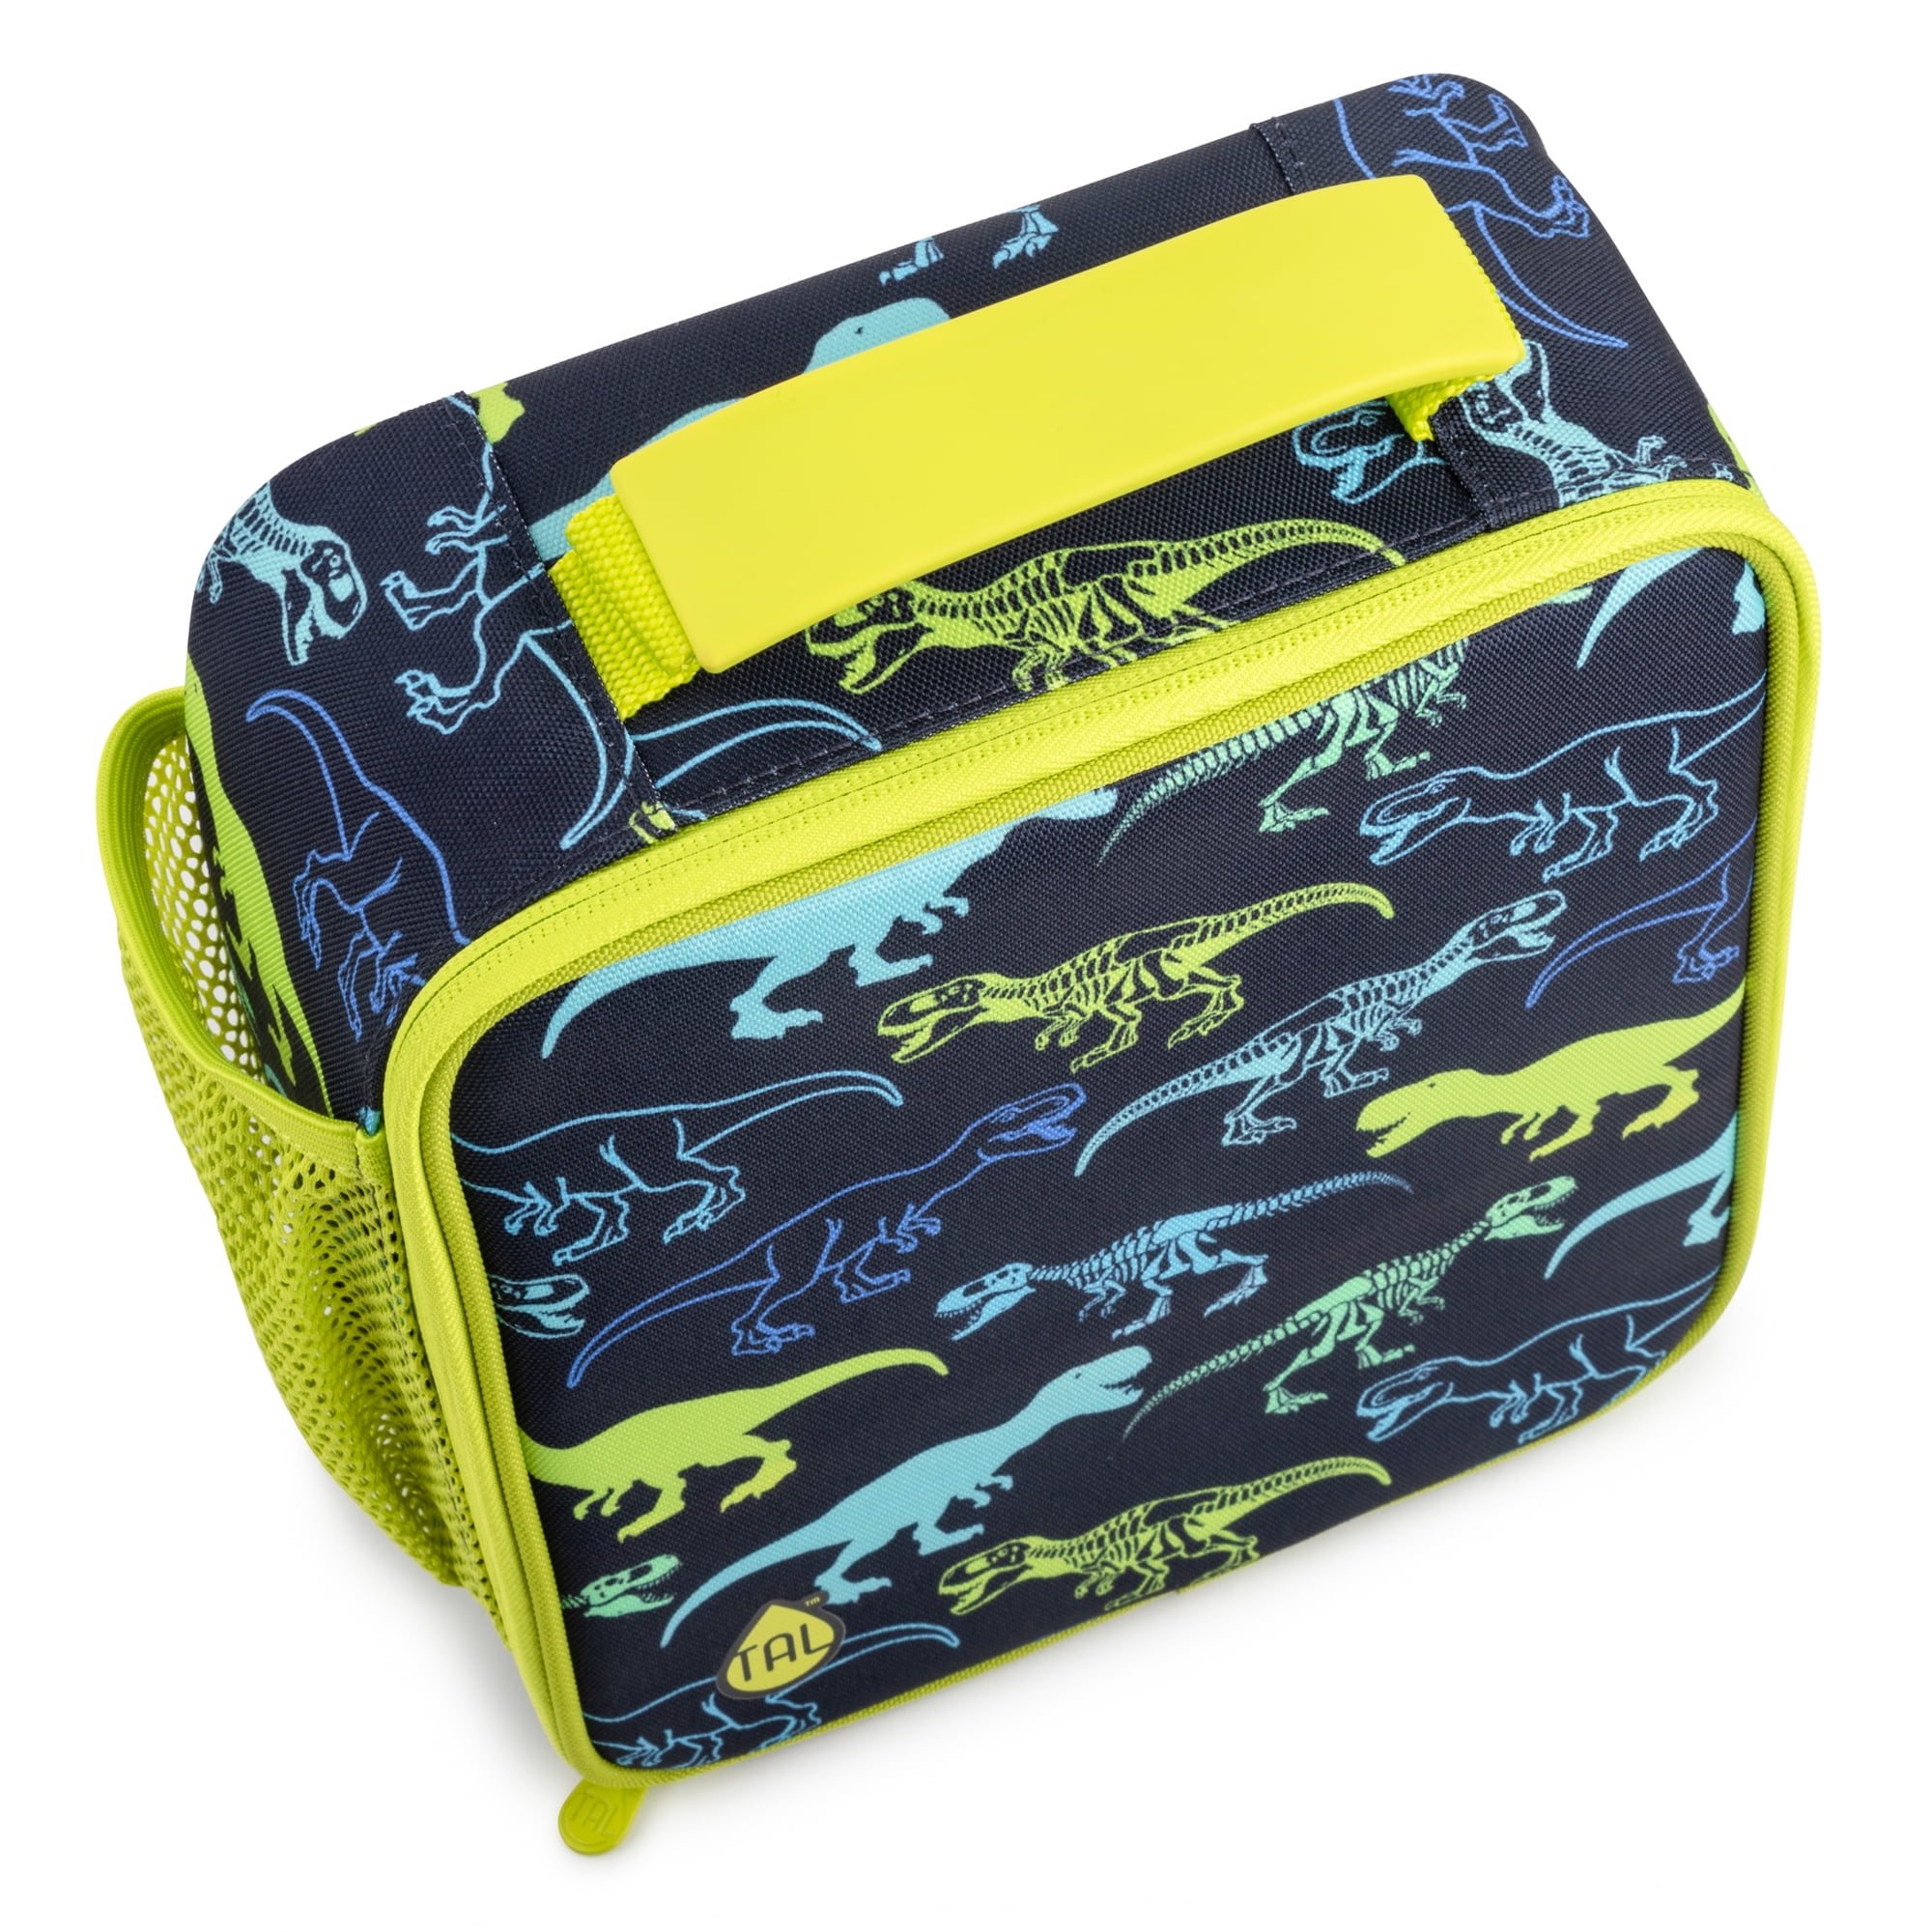 Low-Cost Wholesale Friendly Dinosaur NGIL Insulated Lunch Bag In